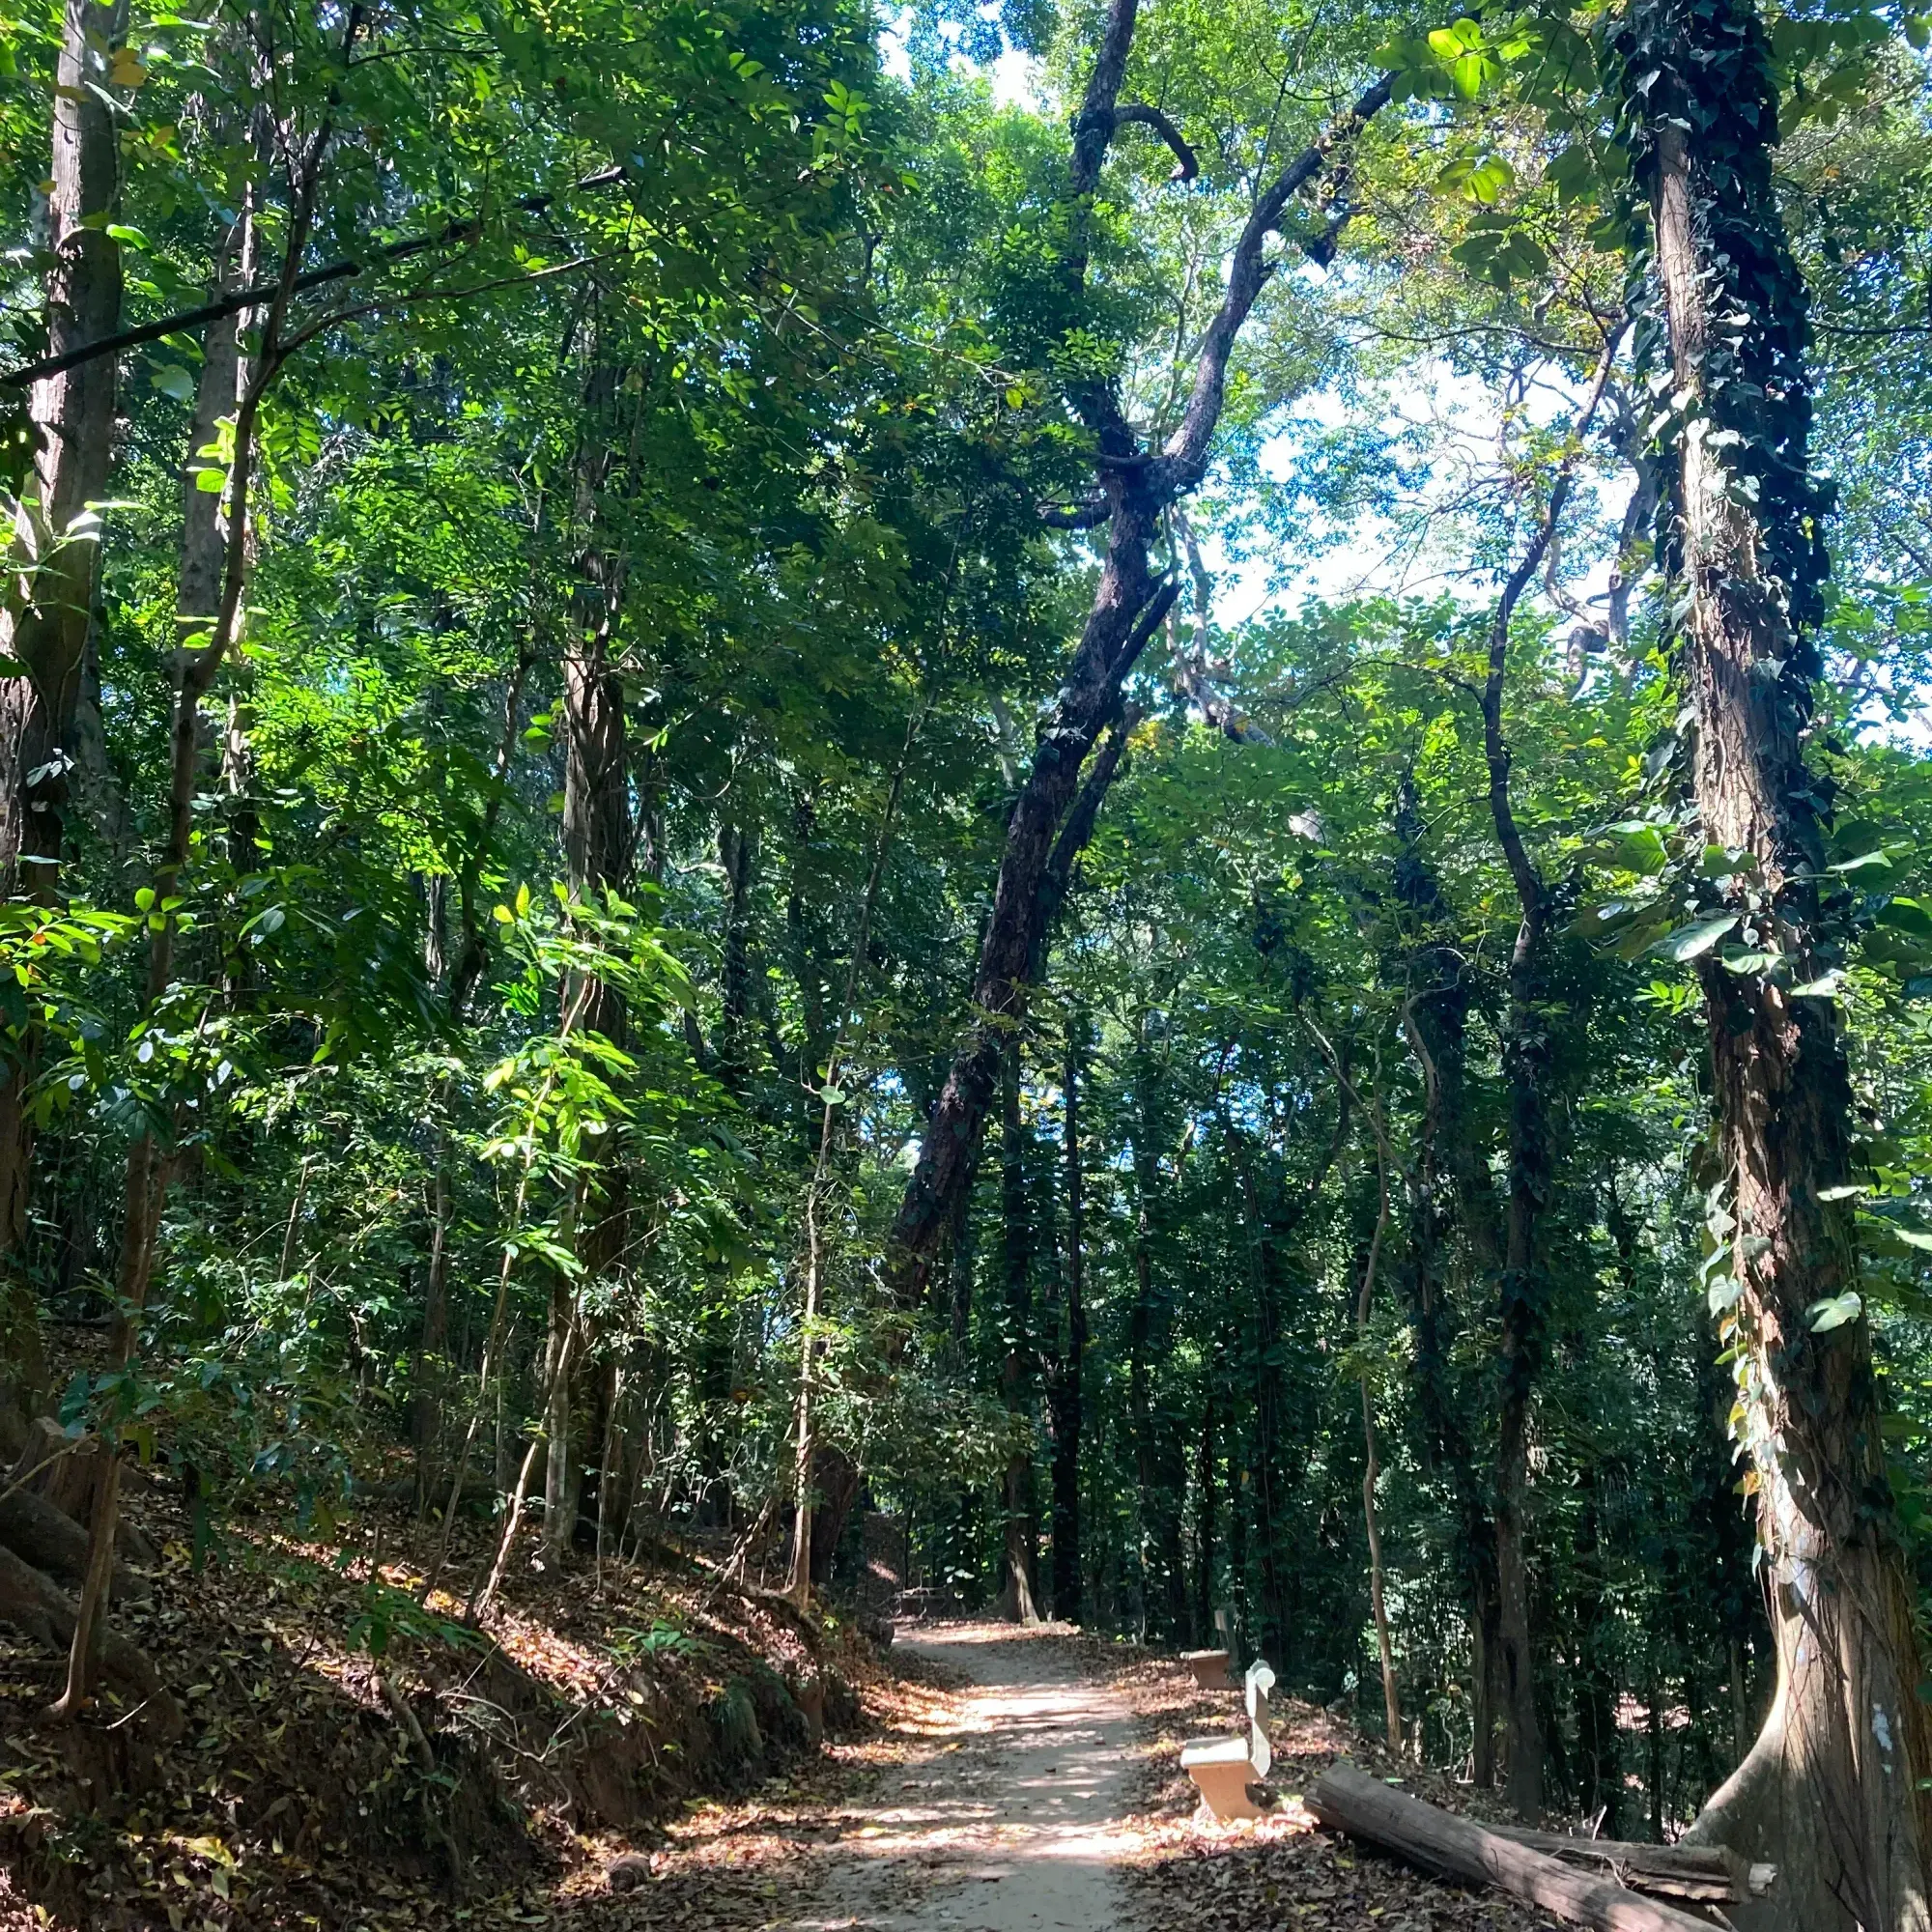 One of the roads through the forest at the Udawattakele Sanctuary in Kandy, Sri Lanka.